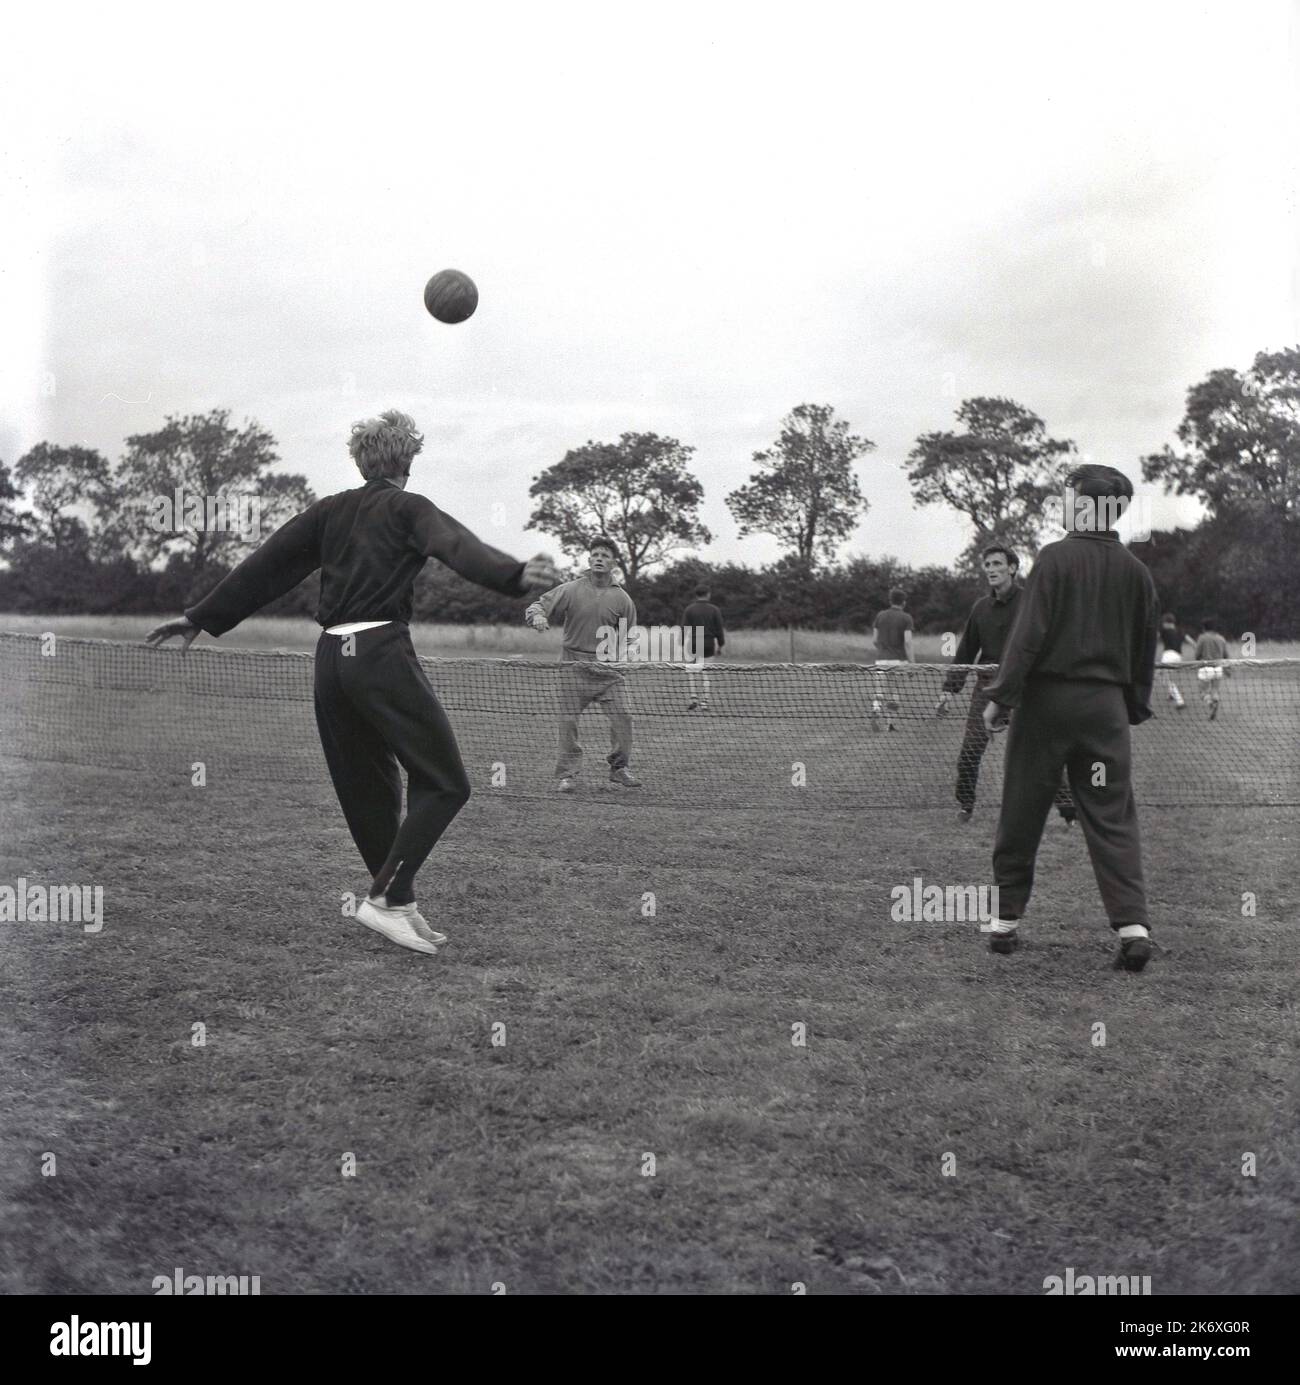 1960s, historical, footballers of Aylesbury United FC in the cotton tracksuits of the era, out on a large grass fieid, doing some pre-season training by keeping a football above a net, Aylesbury, Buckinghamshire, England, UK. Stock Photo